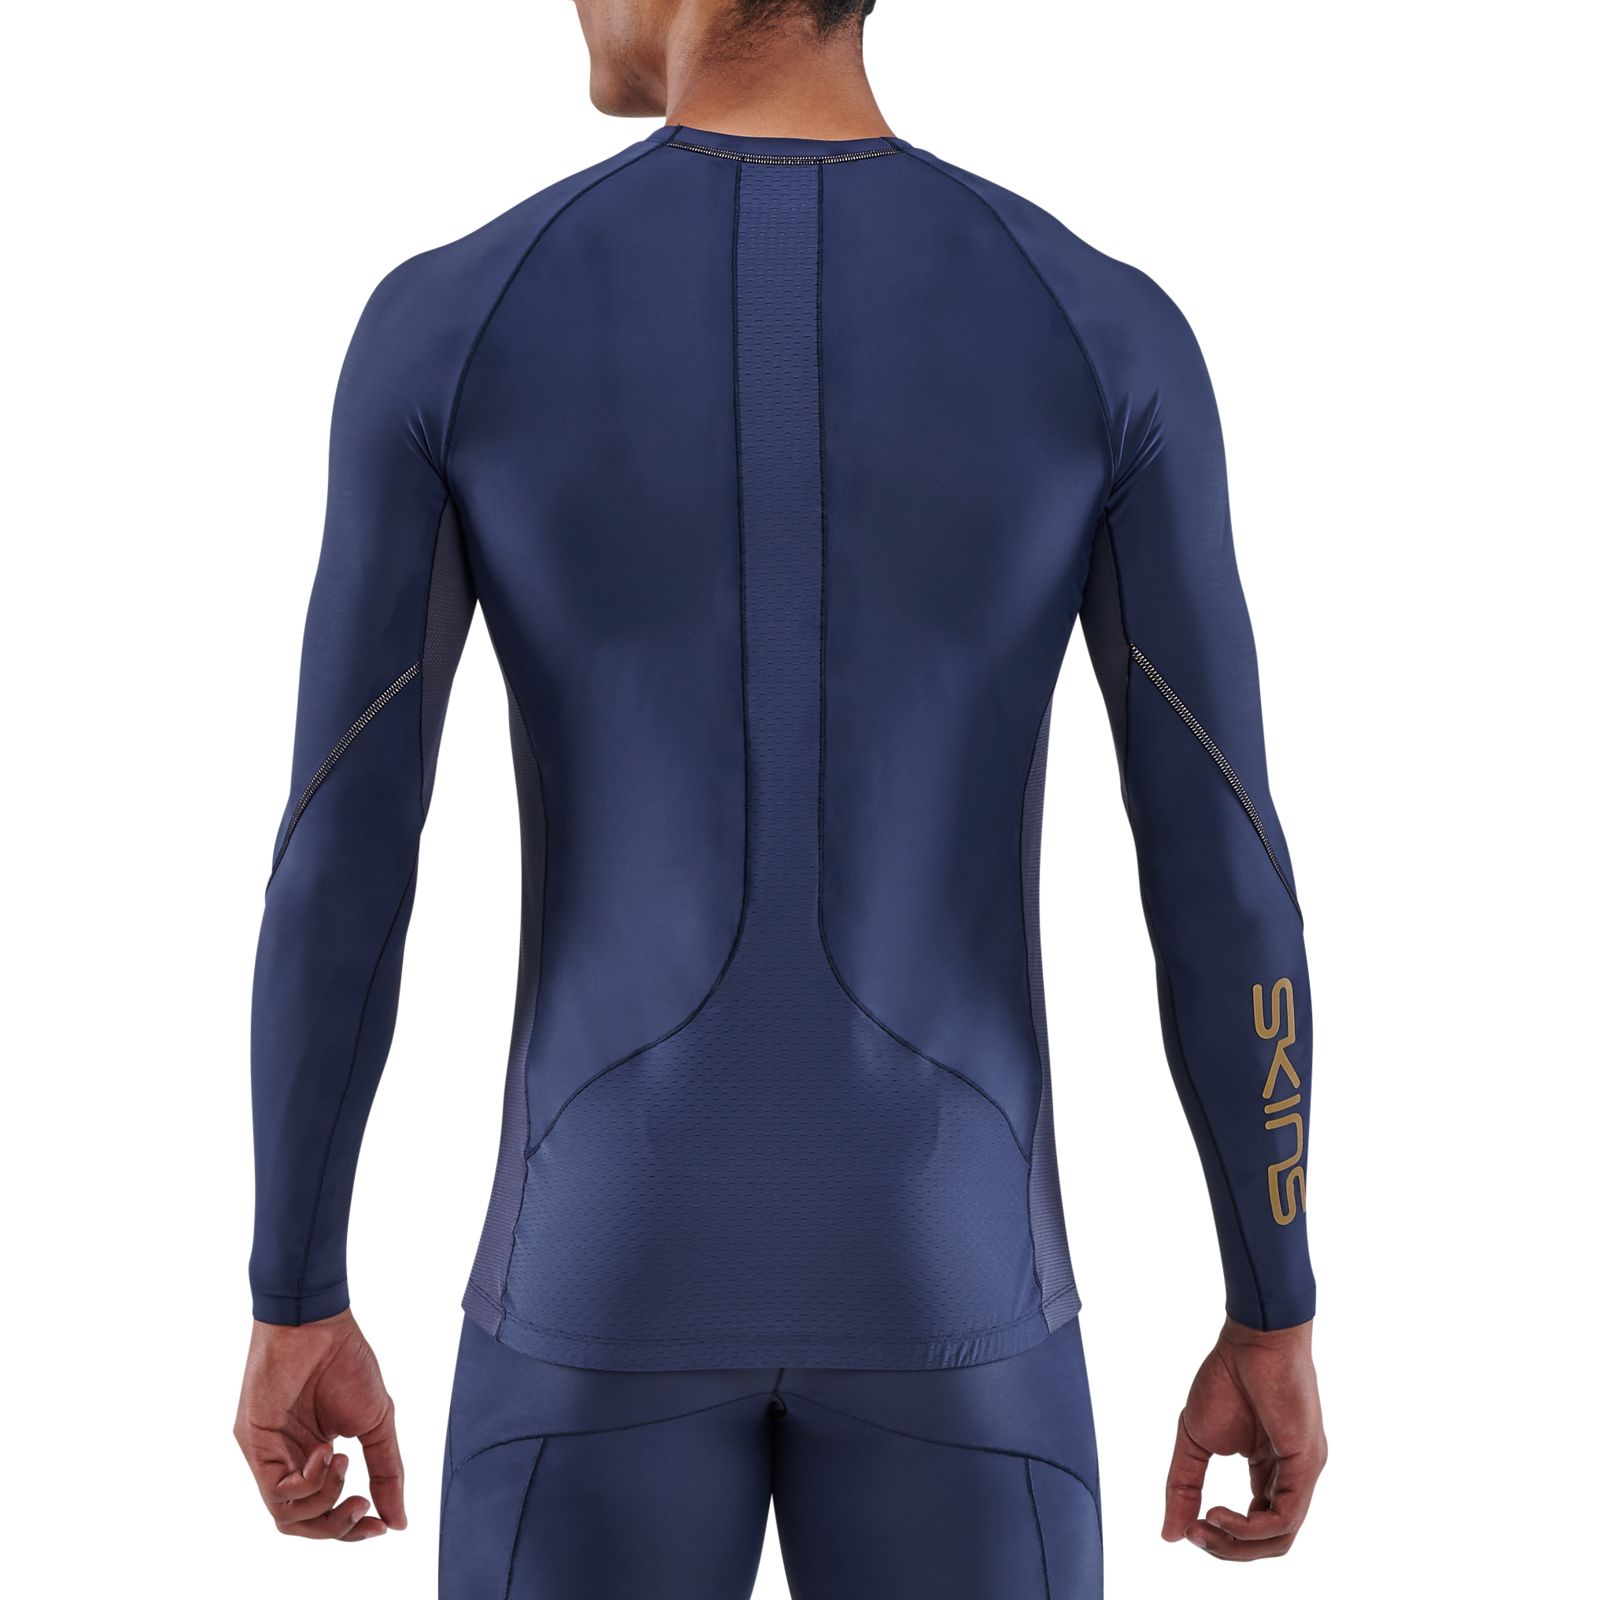 SKINS RY400 Men's Long Sleeve Top — Running Compression